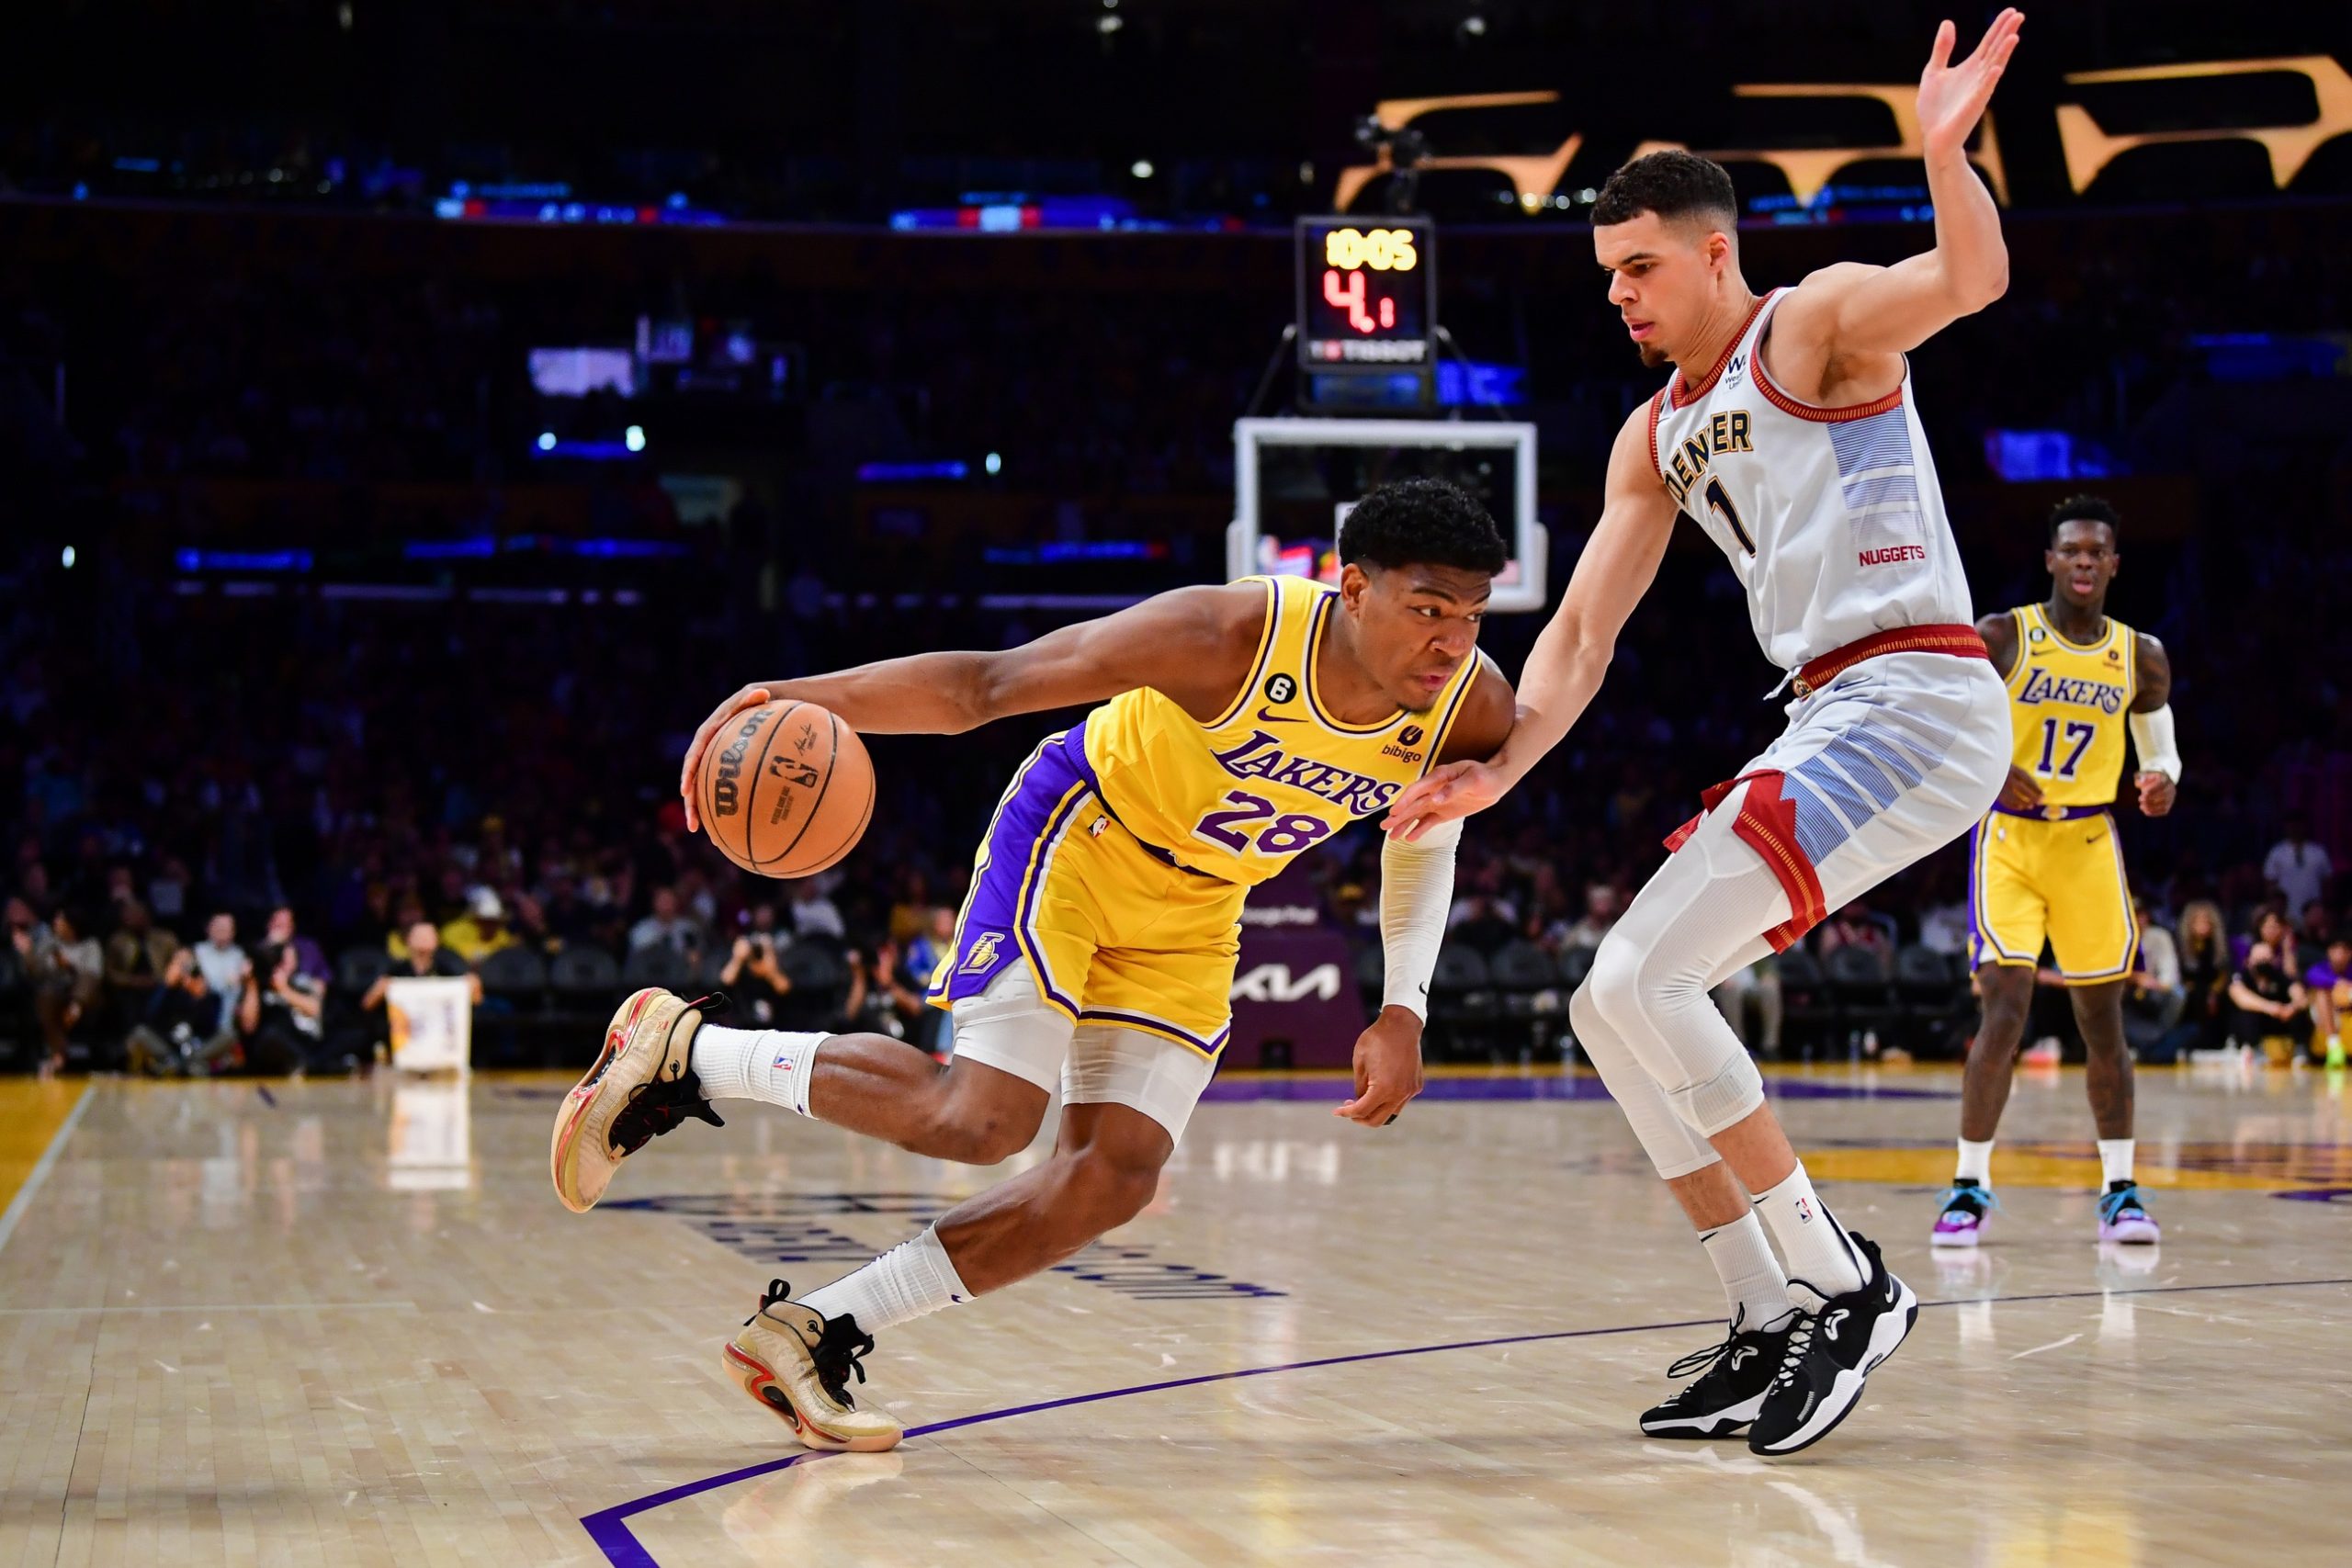 May 22, 2023; Los Angeles, California, USA; Los Angeles Lakers forward Rui Hachimura (28) drives to the basket against Denver Nuggets forward Michael Porter Jr. (1) during the third quarter in game four of the Western Conference Finals for the 2023 NBA playoffs at Crypto.com Arena. Mandatory Credit: Gary A. Vasquez-USA TODAY Sports